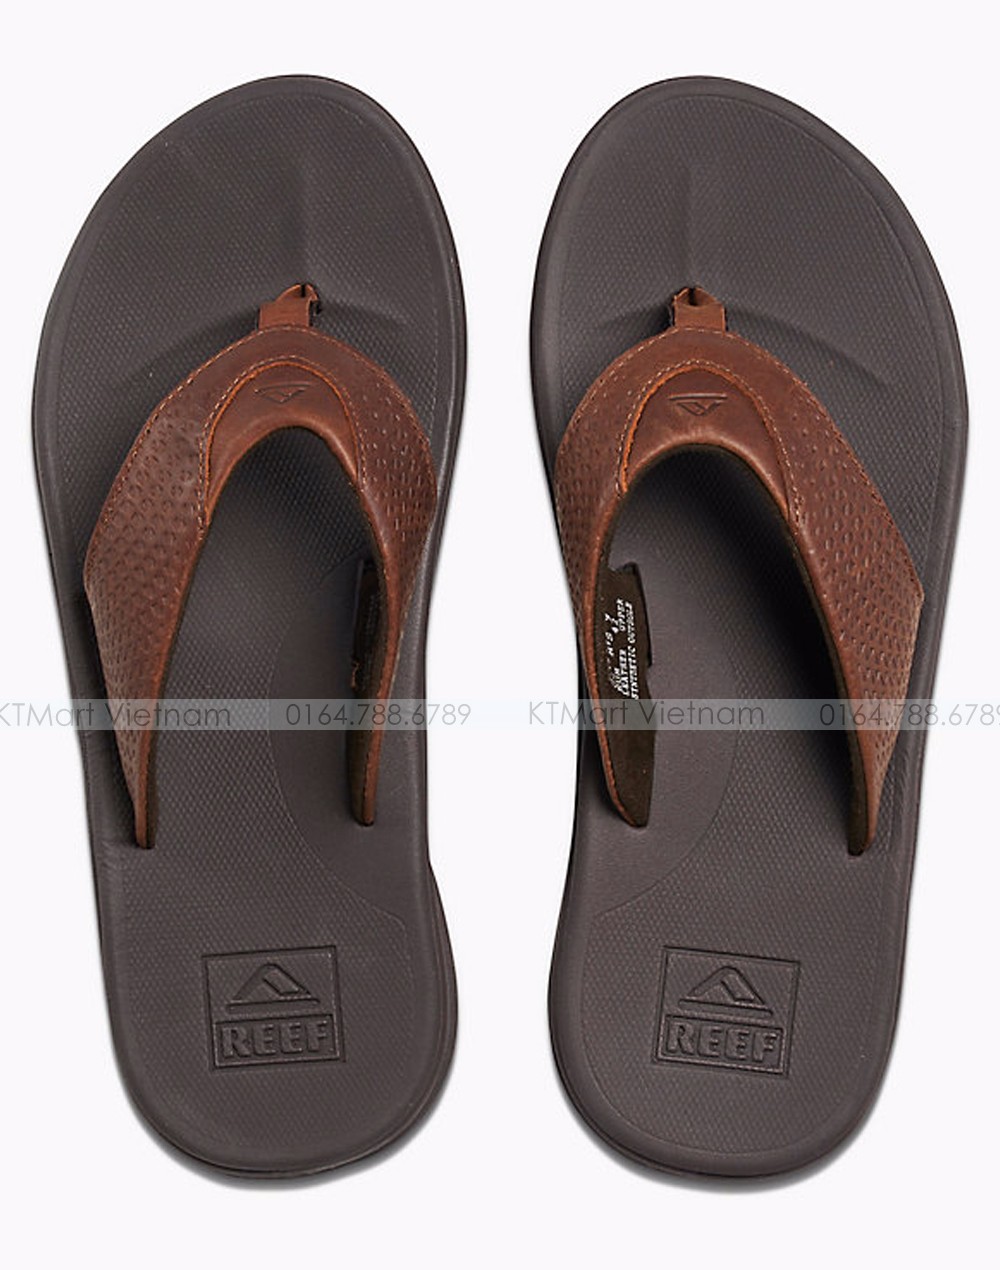 Tông Reef Men’s Rover Leather Sandal Reef